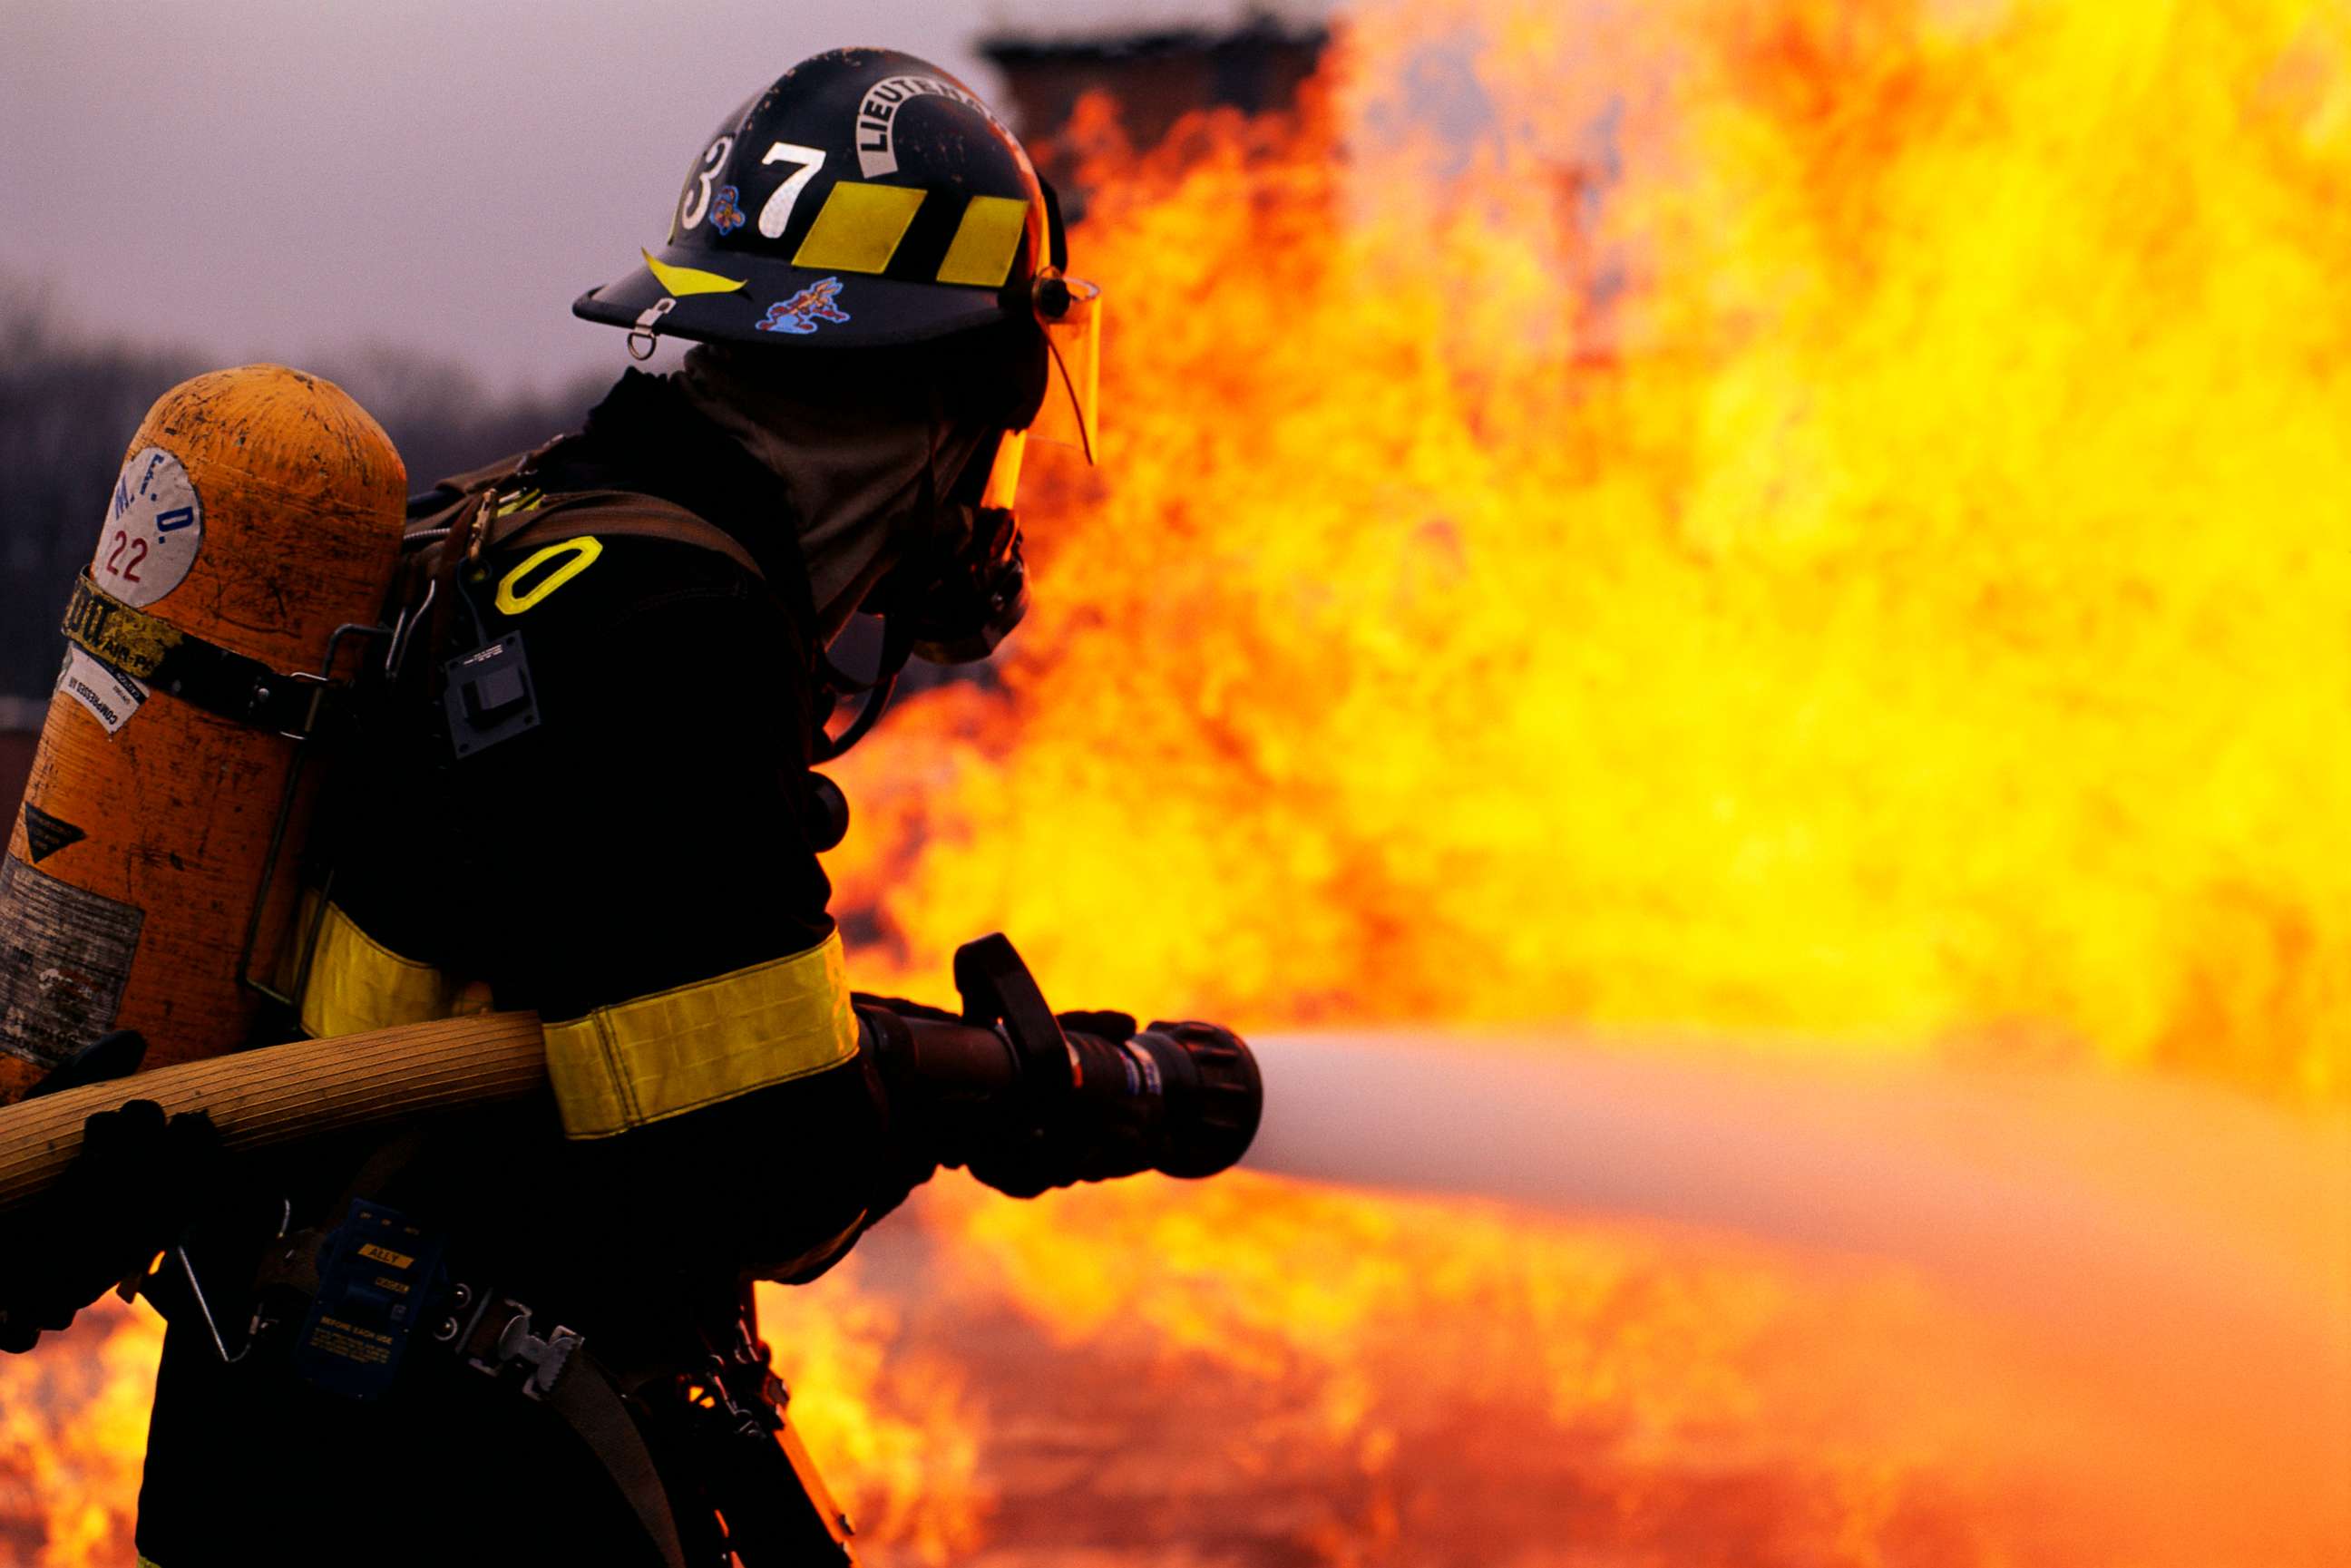 PHOTO: Stock photo of a firefighter.